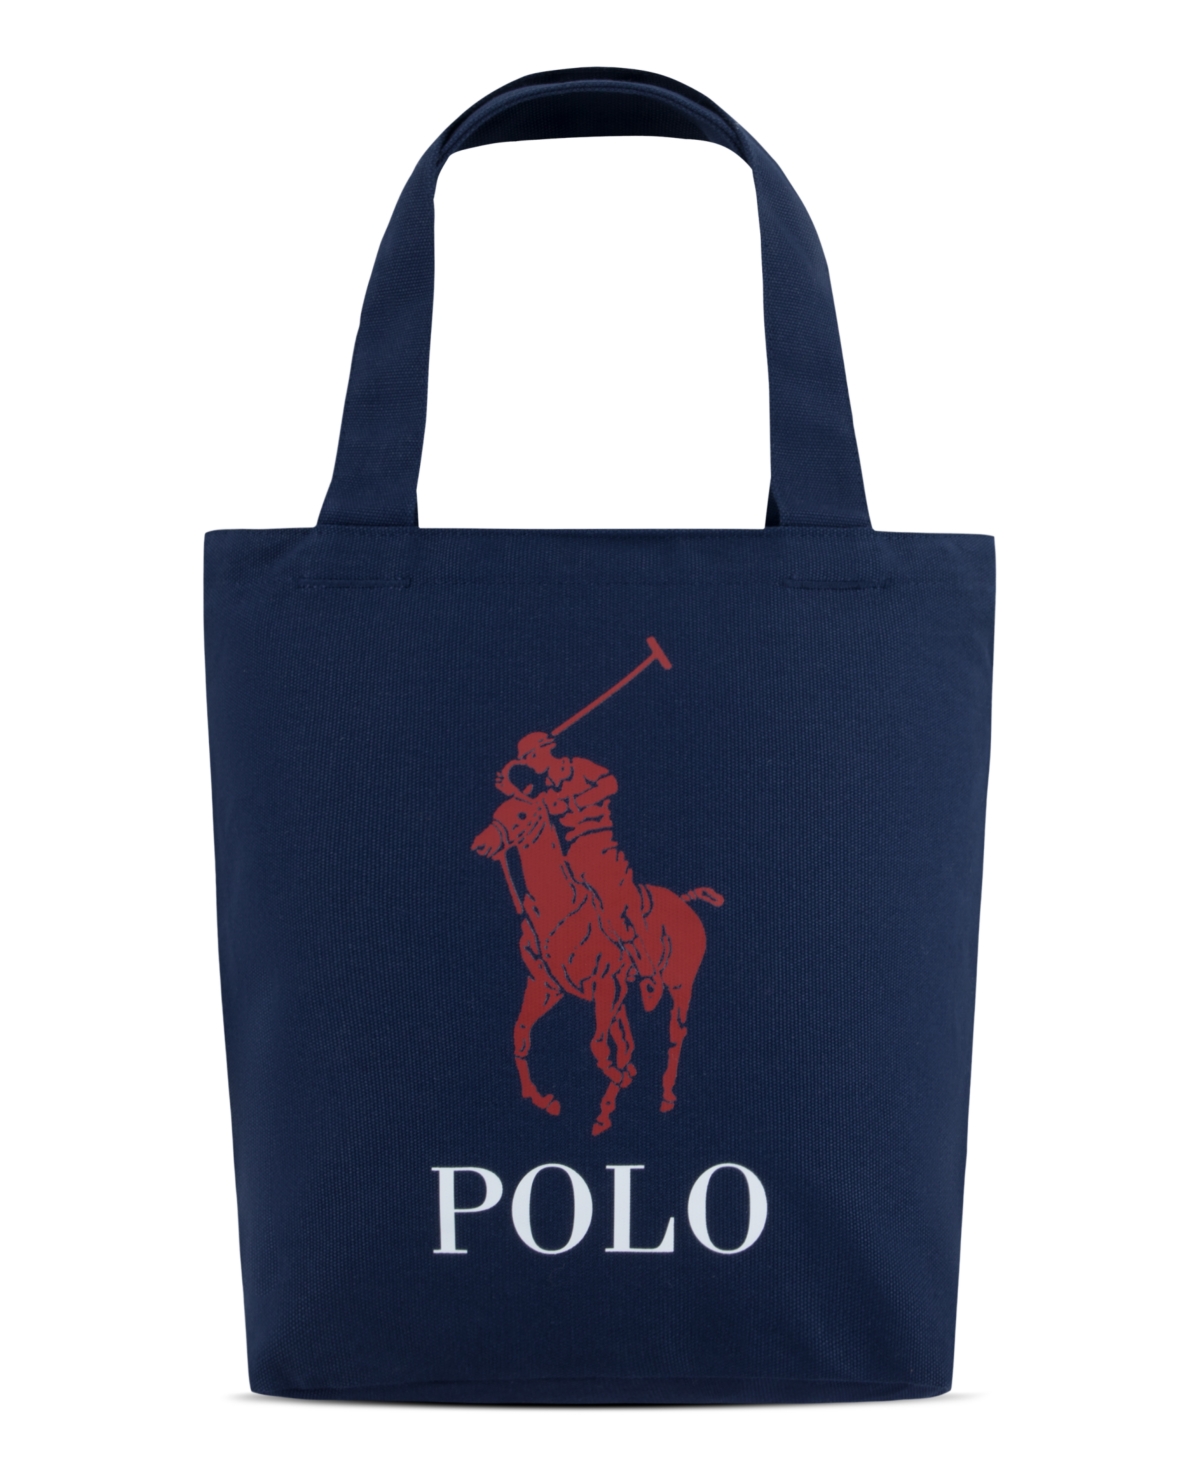 May Pen Men's Clothing Store on Instagram: We like to be different our  kids polo bag to school bags are so unique $15,000 #polo #ralphlauren  #original #onlineshopping #affordable #islandwidedeliveryavailable🚚📦